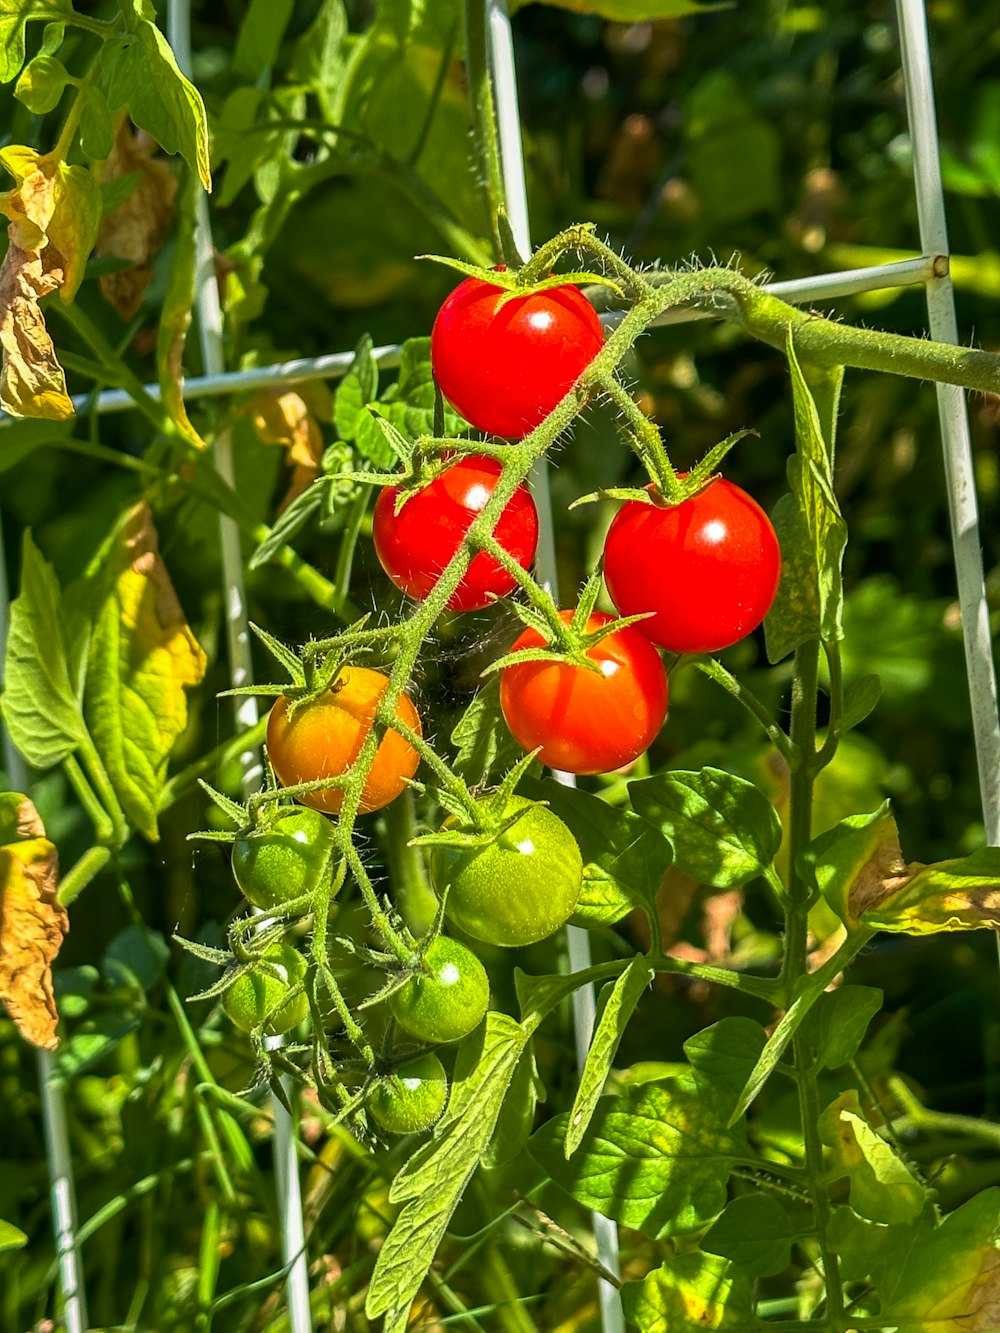 tomatoes growing on a vine in a garden